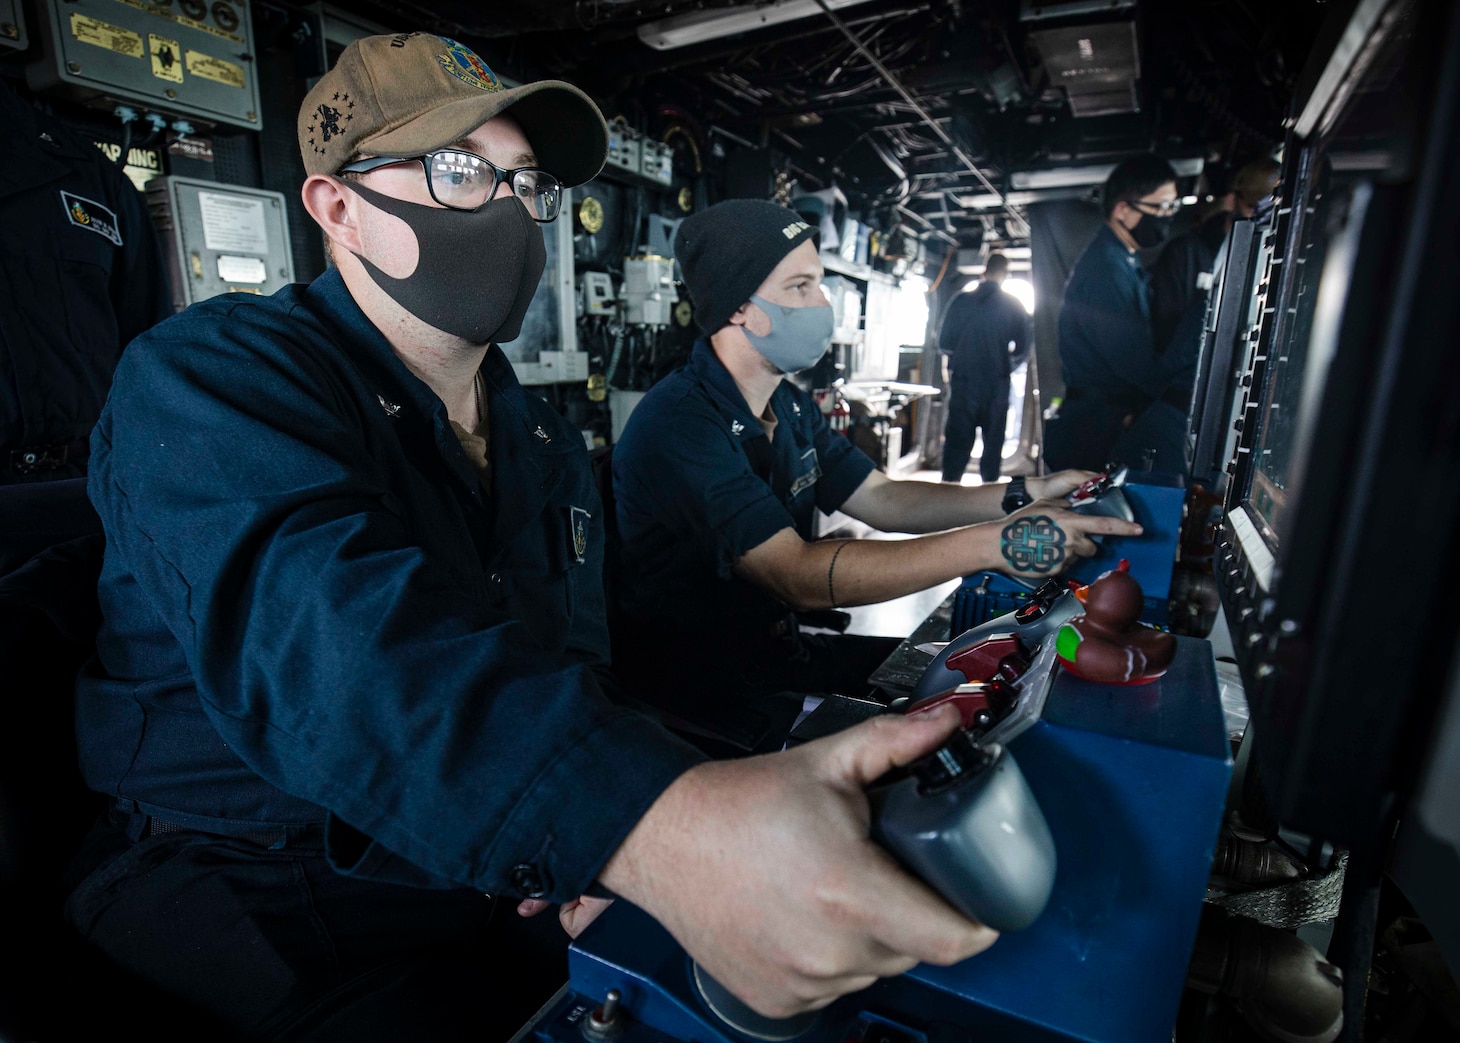 PARACEL ISLANDS, SOUTH CHINA SEA (Feb. 05, 2021) Gunner’s Mate 3rd Class Carter Musgrave, left, from Zanesville, Ohio, and Gunner’s Mate 3rd Class Brayden Barthel, from Hagerstown, Md., track surface contacts through mark-38 25mm gun remote operator consoles in the pilot house aboard the Arleigh Burke-class guided-missile destroyer USS John S. McCain (DDG 56) as the ship conducts routine underway operations. McCain is forward-deployed to the U.S. 7th Fleet area of operations in support of security and stability in the Indo-Pacific region. (U.S. Navy photo by Mass Communication Specialist 2nd Class Markus Castaneda)